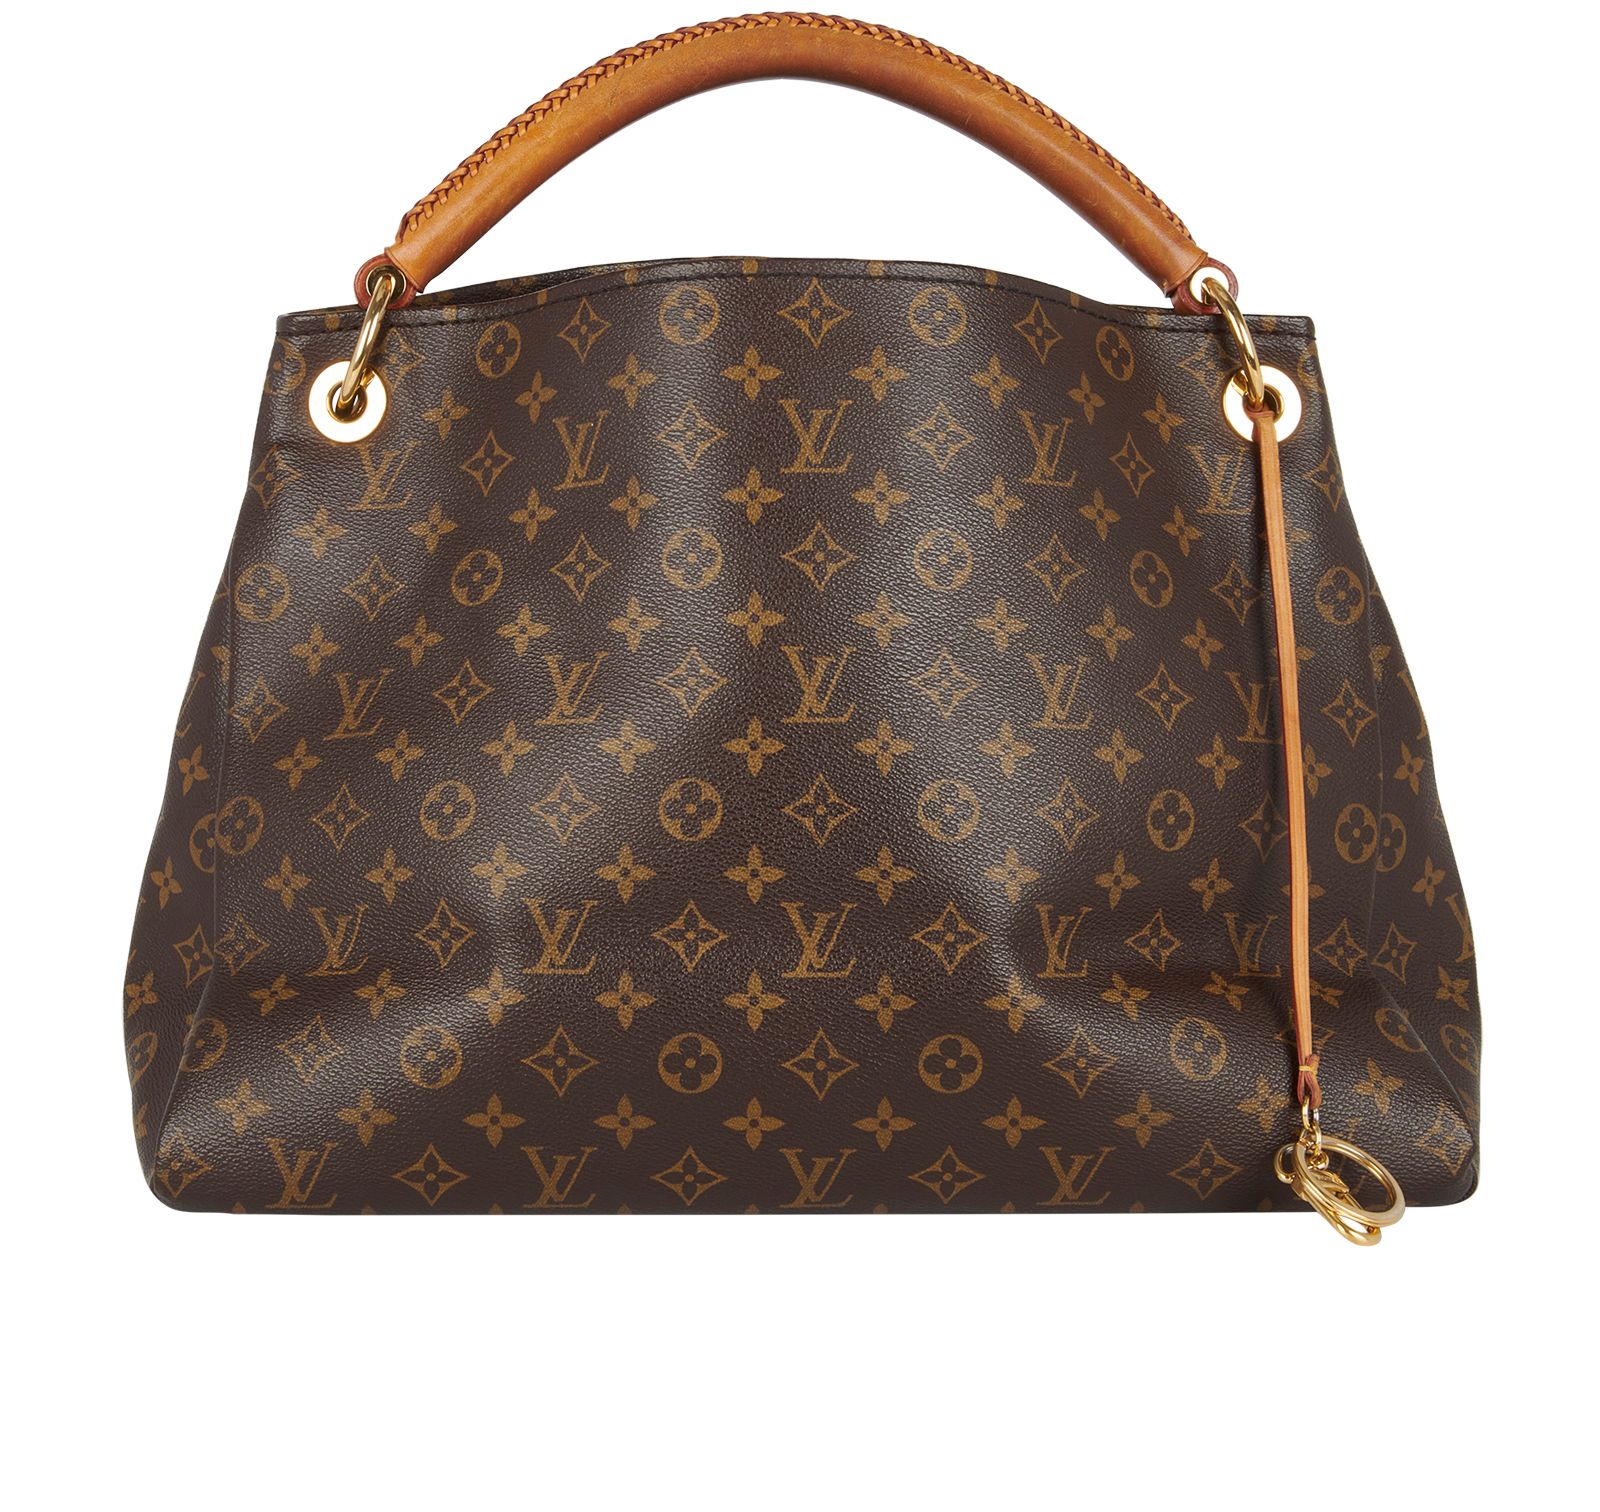 Designer Exchange Ltd - The Louis Vuitton Artsy is one of our